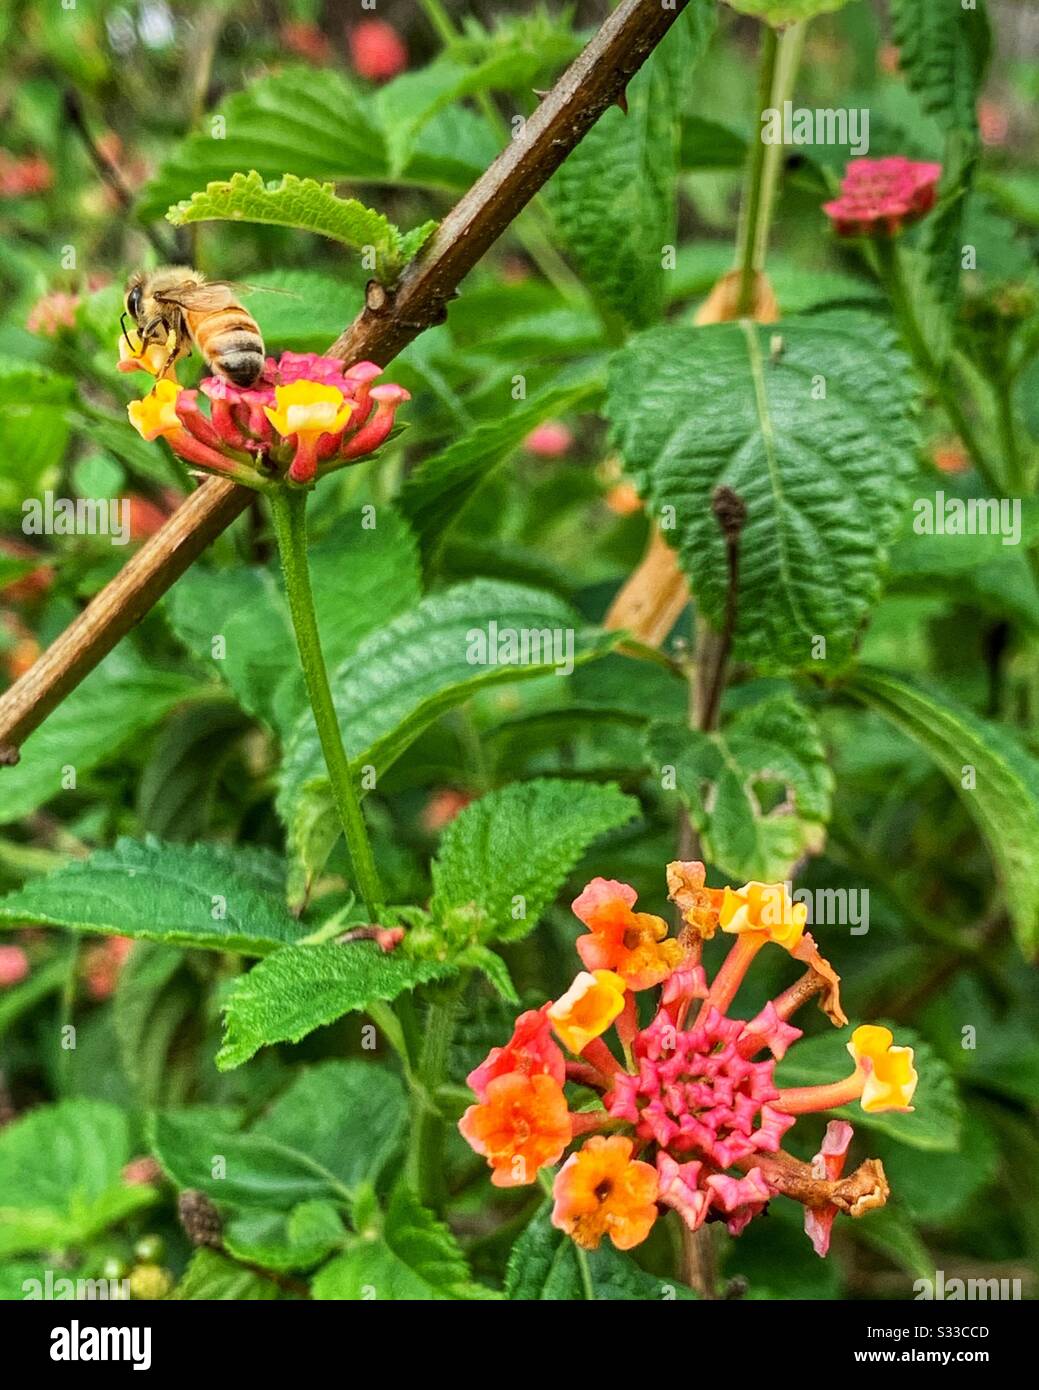 Brightly coloured Lantana flowers with a bee collecting pollen Stock Photo